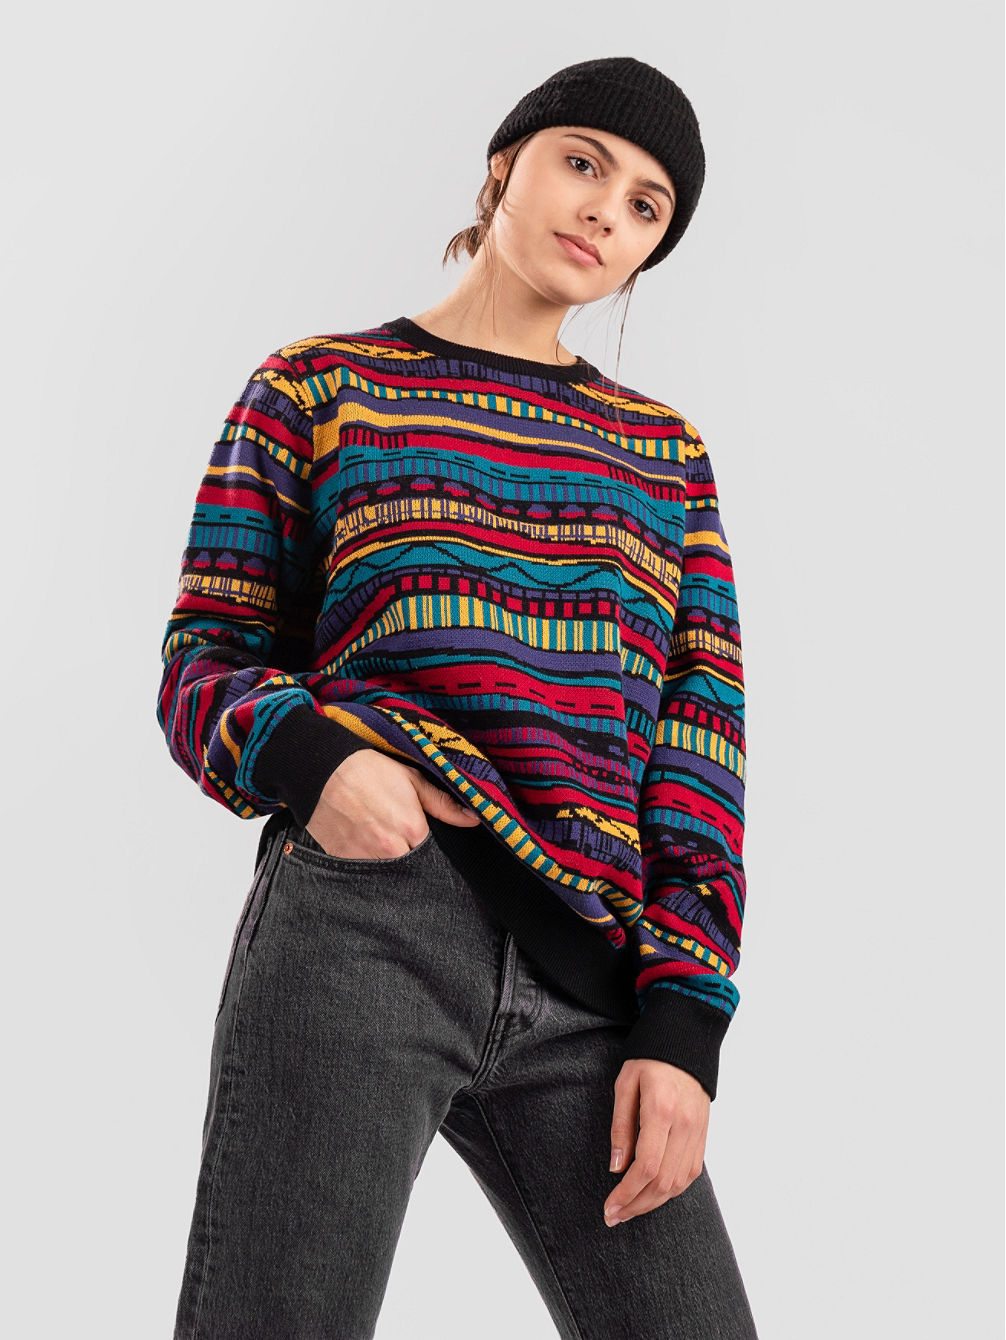 Rudy Knit Pull